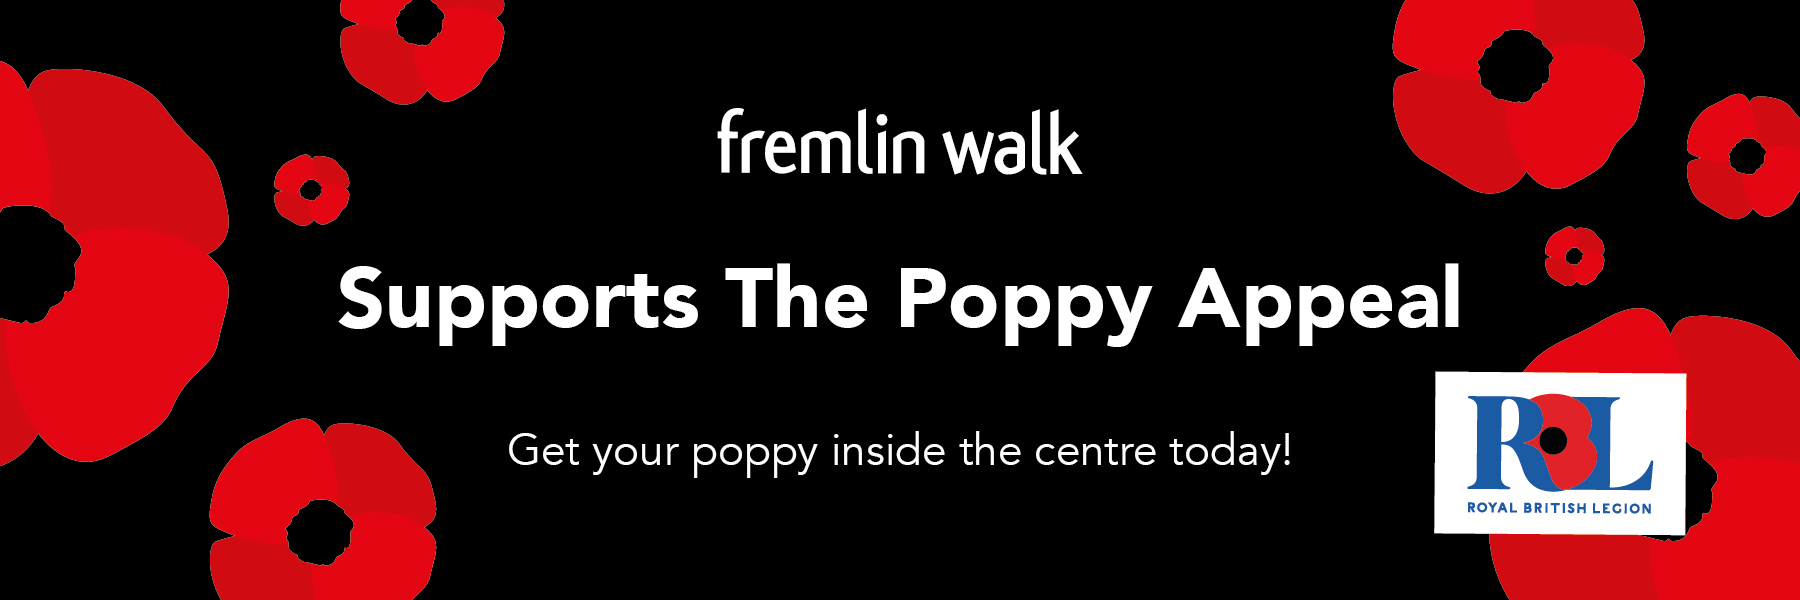 Fremlin Walk supports the Poppy Appeal!